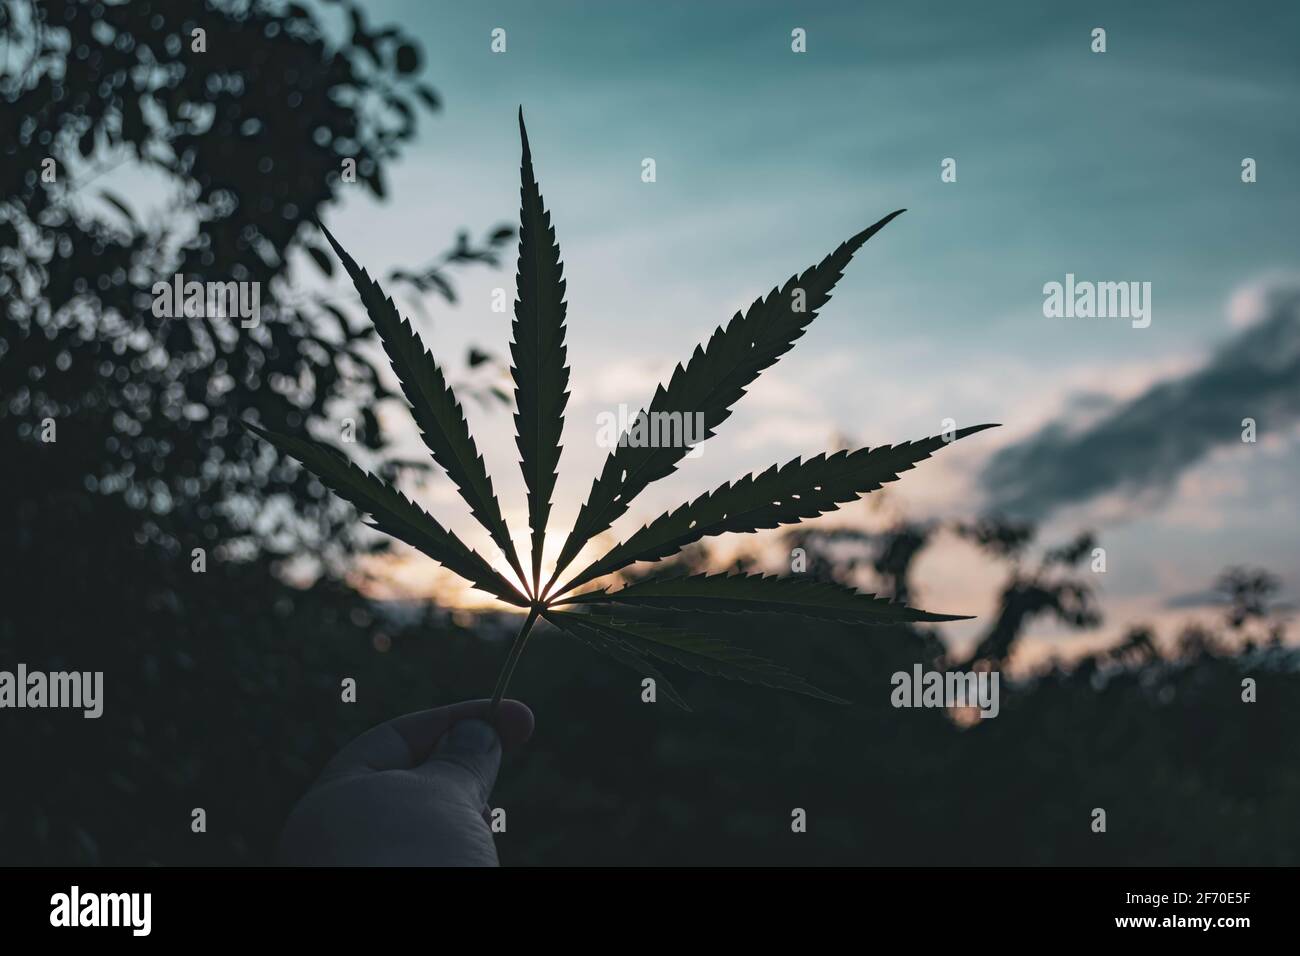 Cannabis leaf against a sunset and dark background. Stock Photo